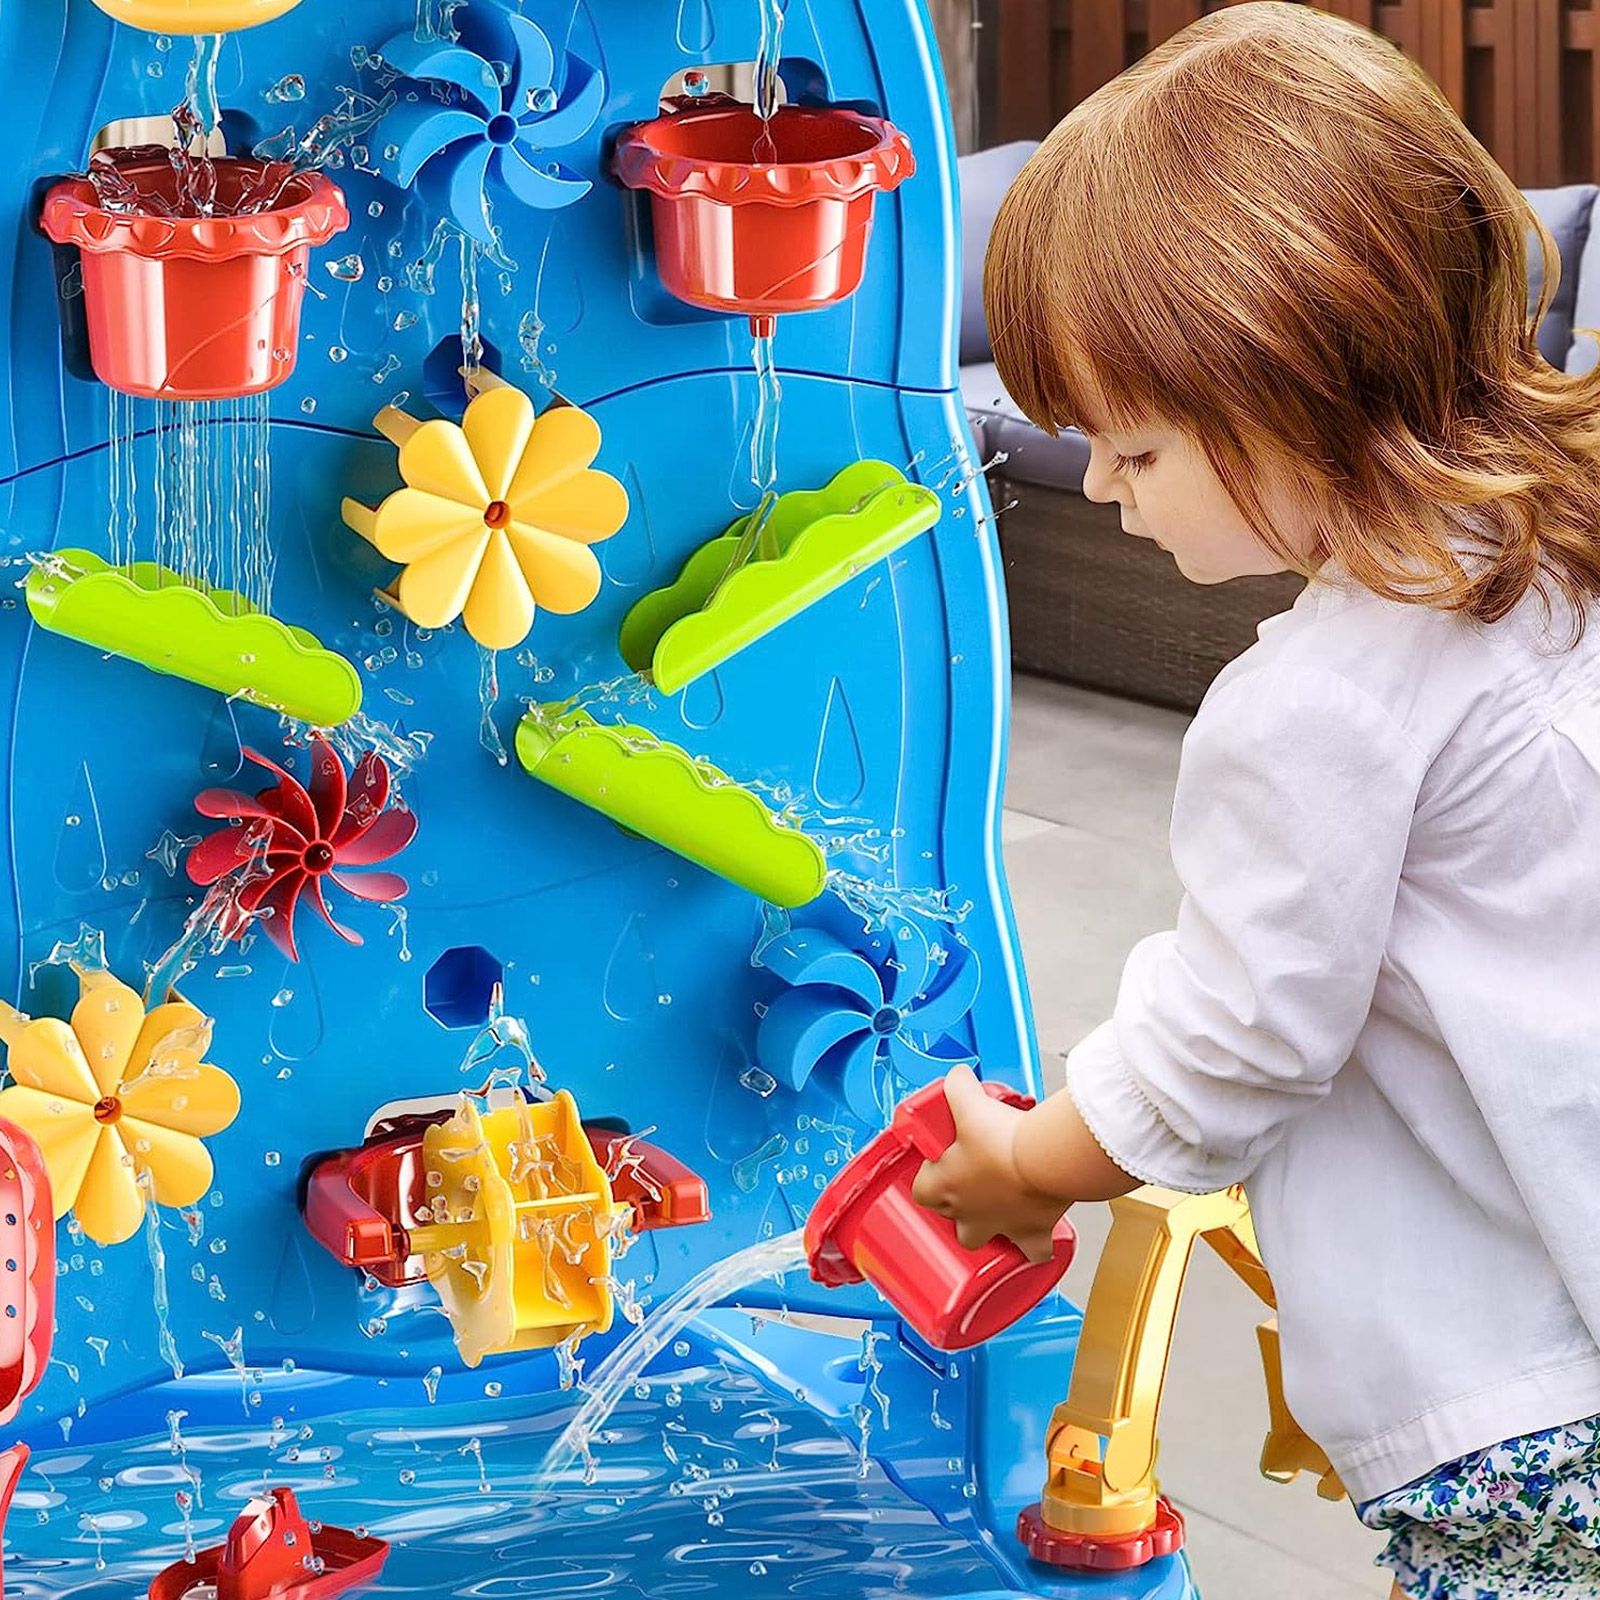 Waterfall Wall Water Table Sand Pit Play Ground Activity Centre Playset Toys Park Outdoor Indoor Backyard Sensory Waterplay Station